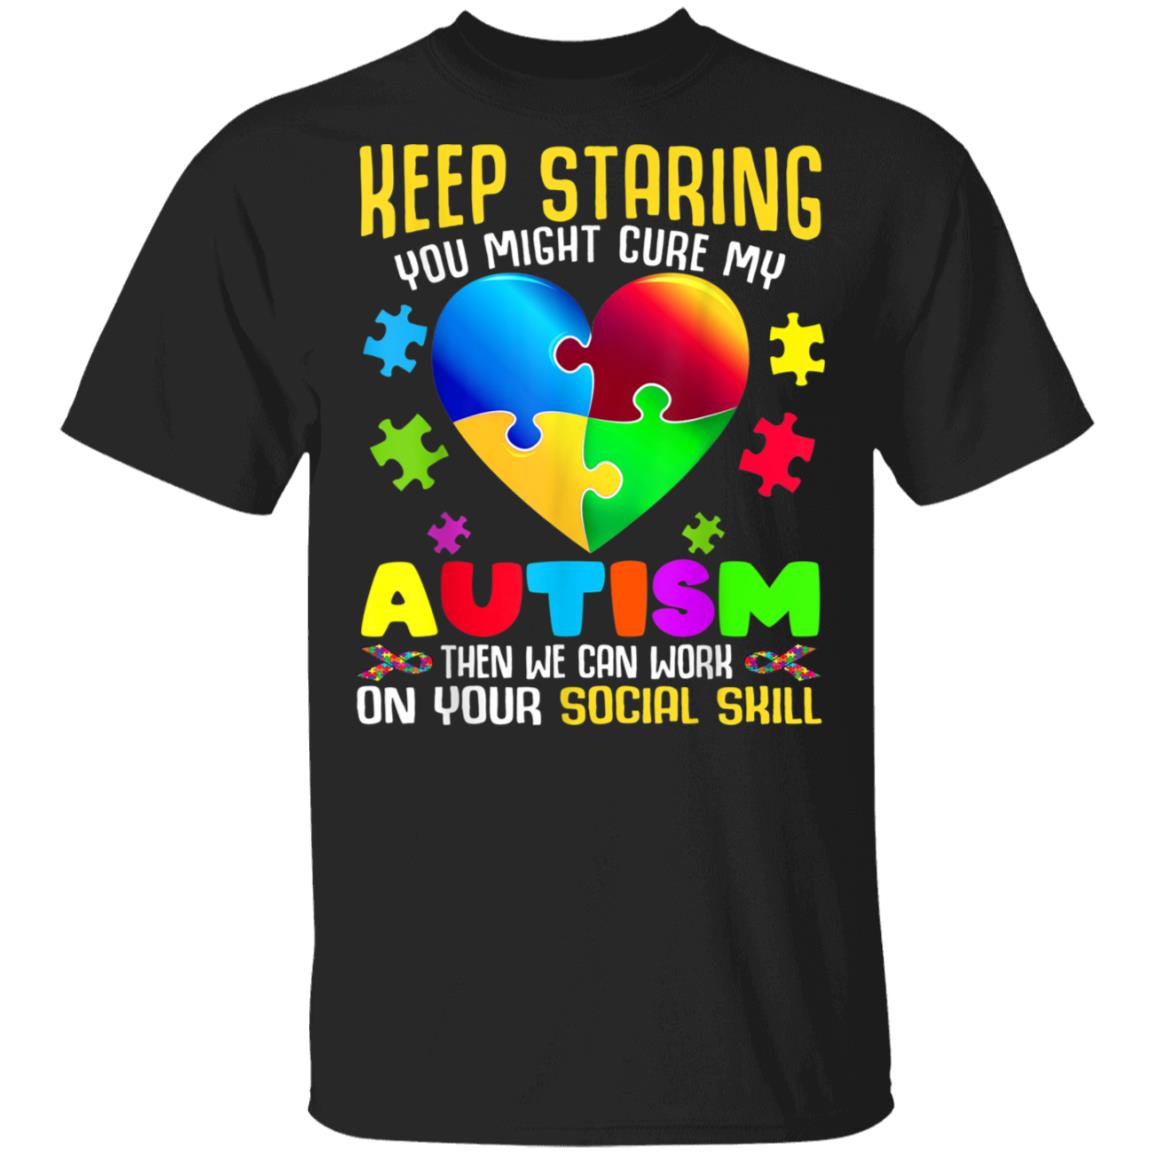 Autism Awareness Keep Staring You Might Cure My Autism T-Shirt